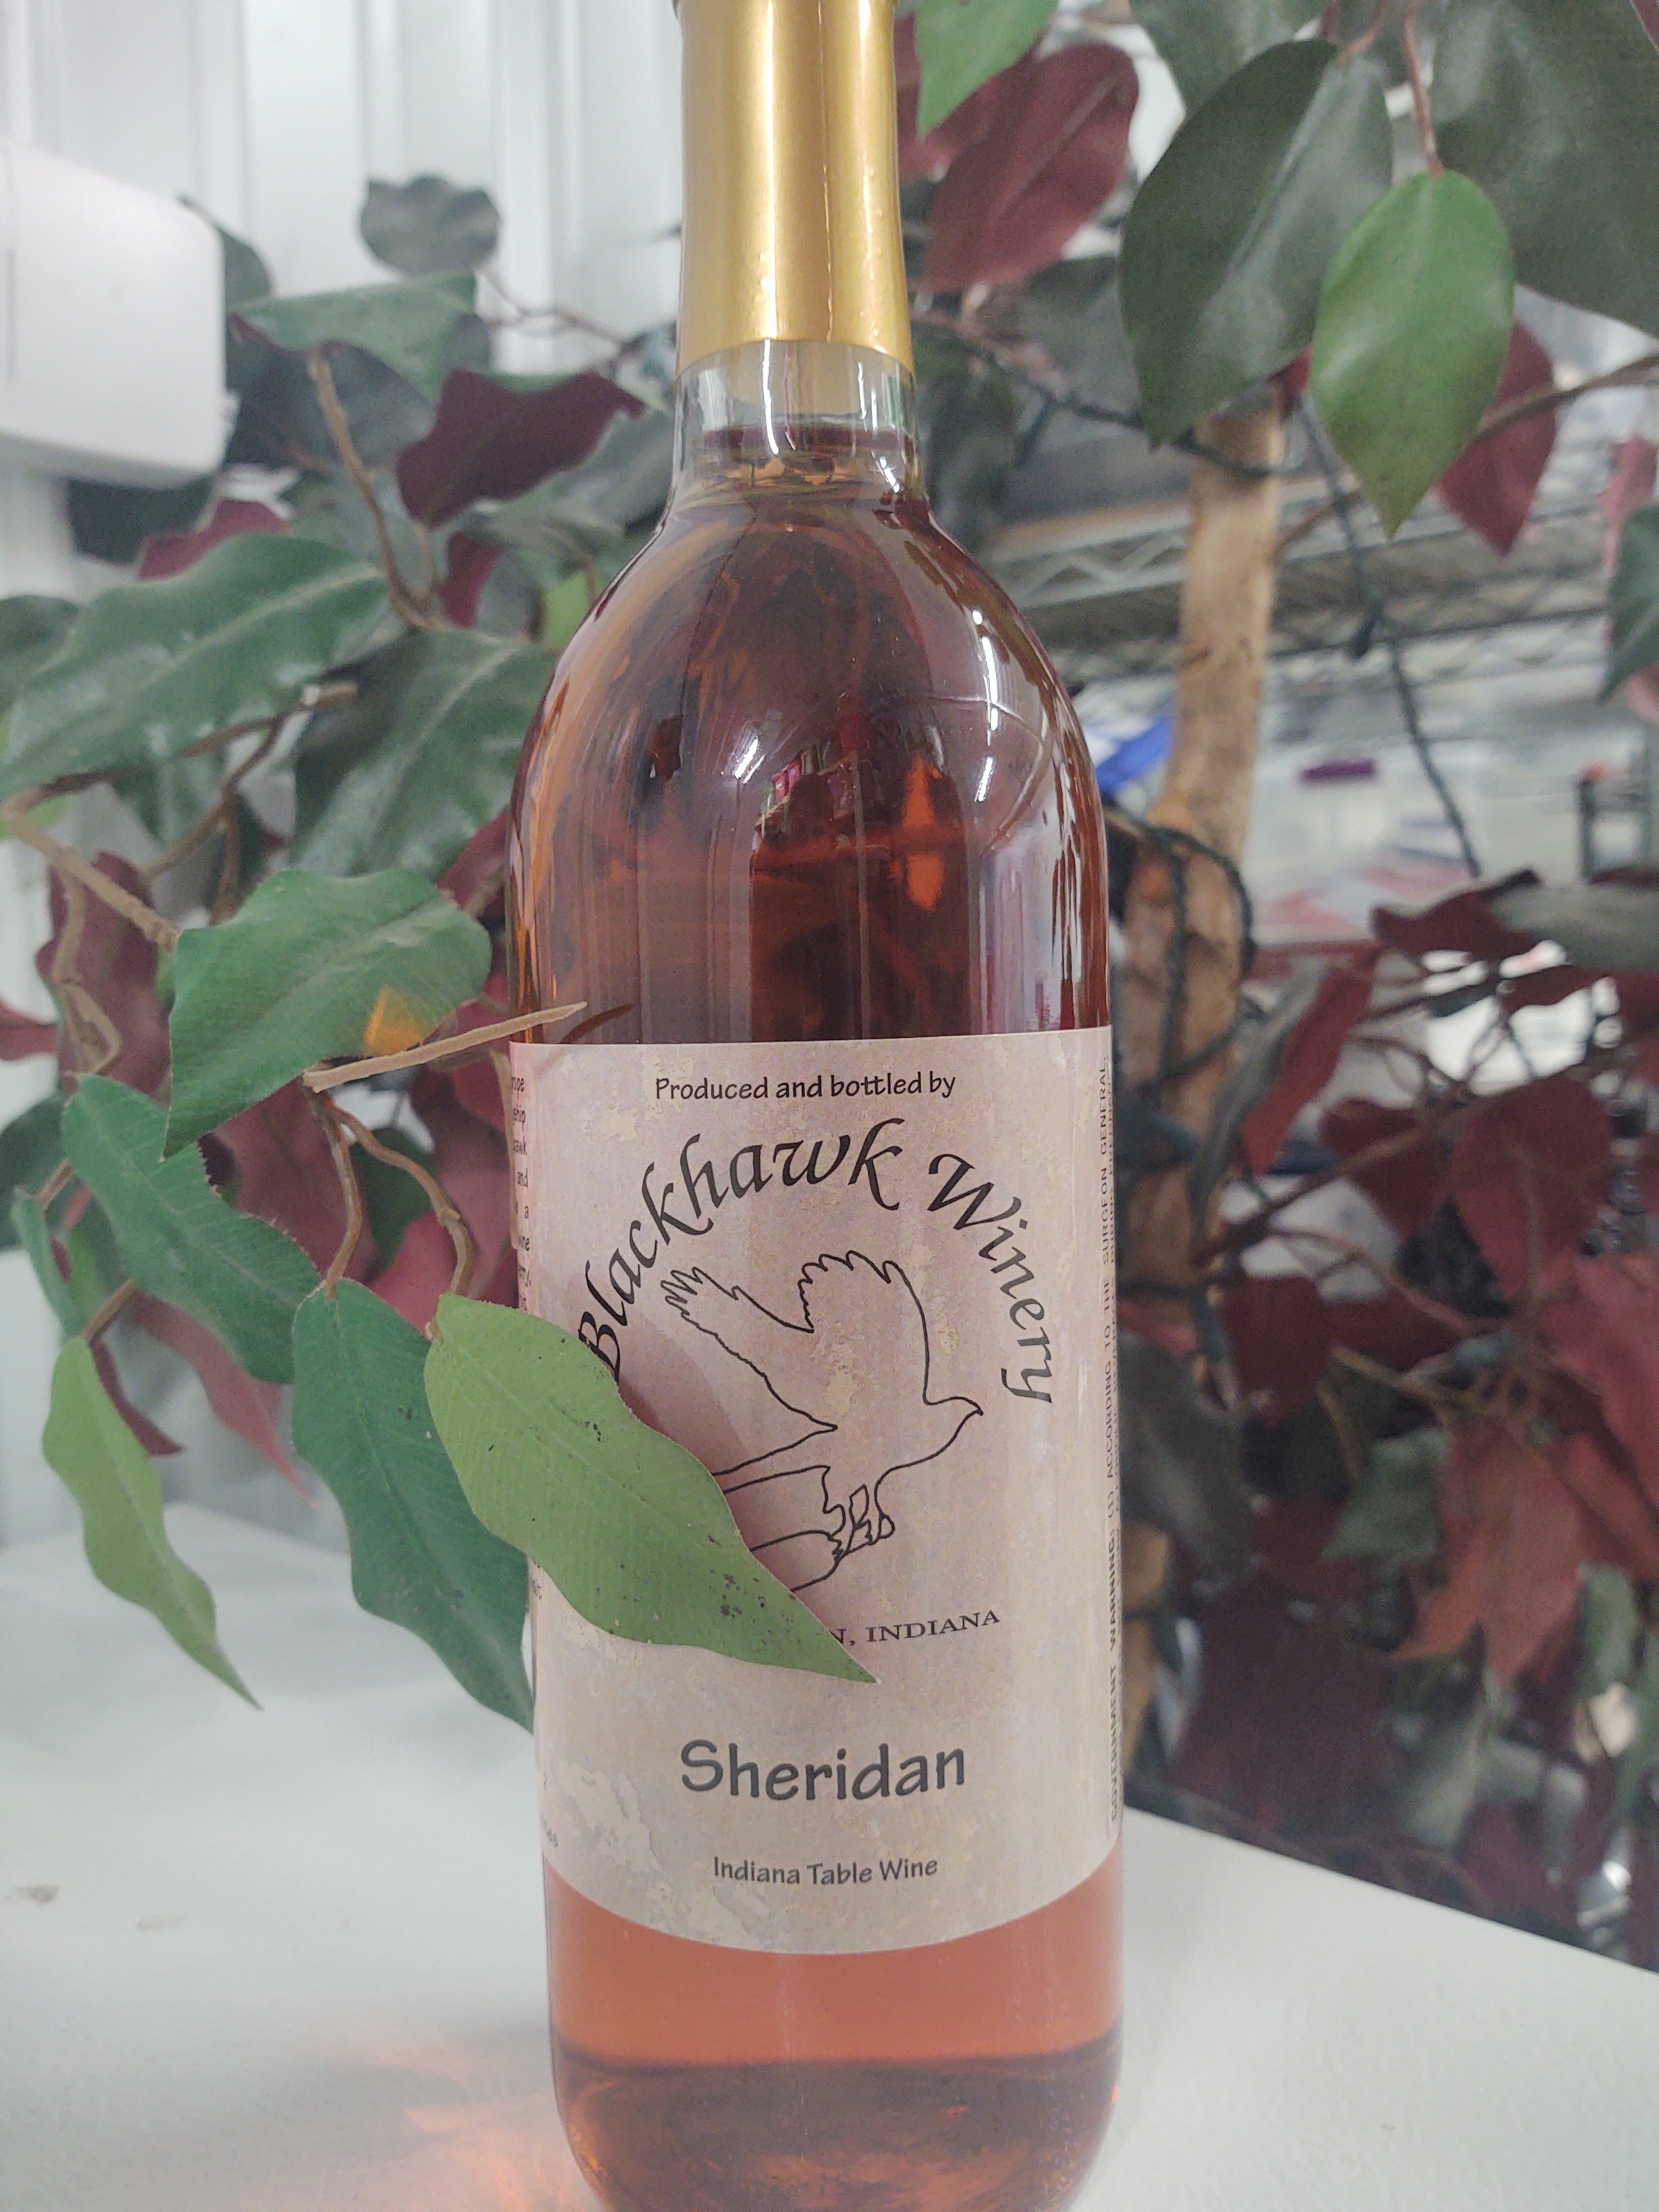 Bottle of Sheridan wine - wine from the vineyard in Sheridan, Indiana, made with Sheridan grapes. A wine you will find no where else. A rose that tastes like a very fruity white zin. 750 ml bottle. Wine can only be shipped to the following states: AK, AZ, CO, DC, FL, GA, HI, IA, ID, IL, IN, KS, LA, MA, MD, ME, MN, MO, NC, ND, NE, NH, NM, NV, NY, OH, OR, PA, SC, TN, TX, VA, VT, WA, WI, WV, WY